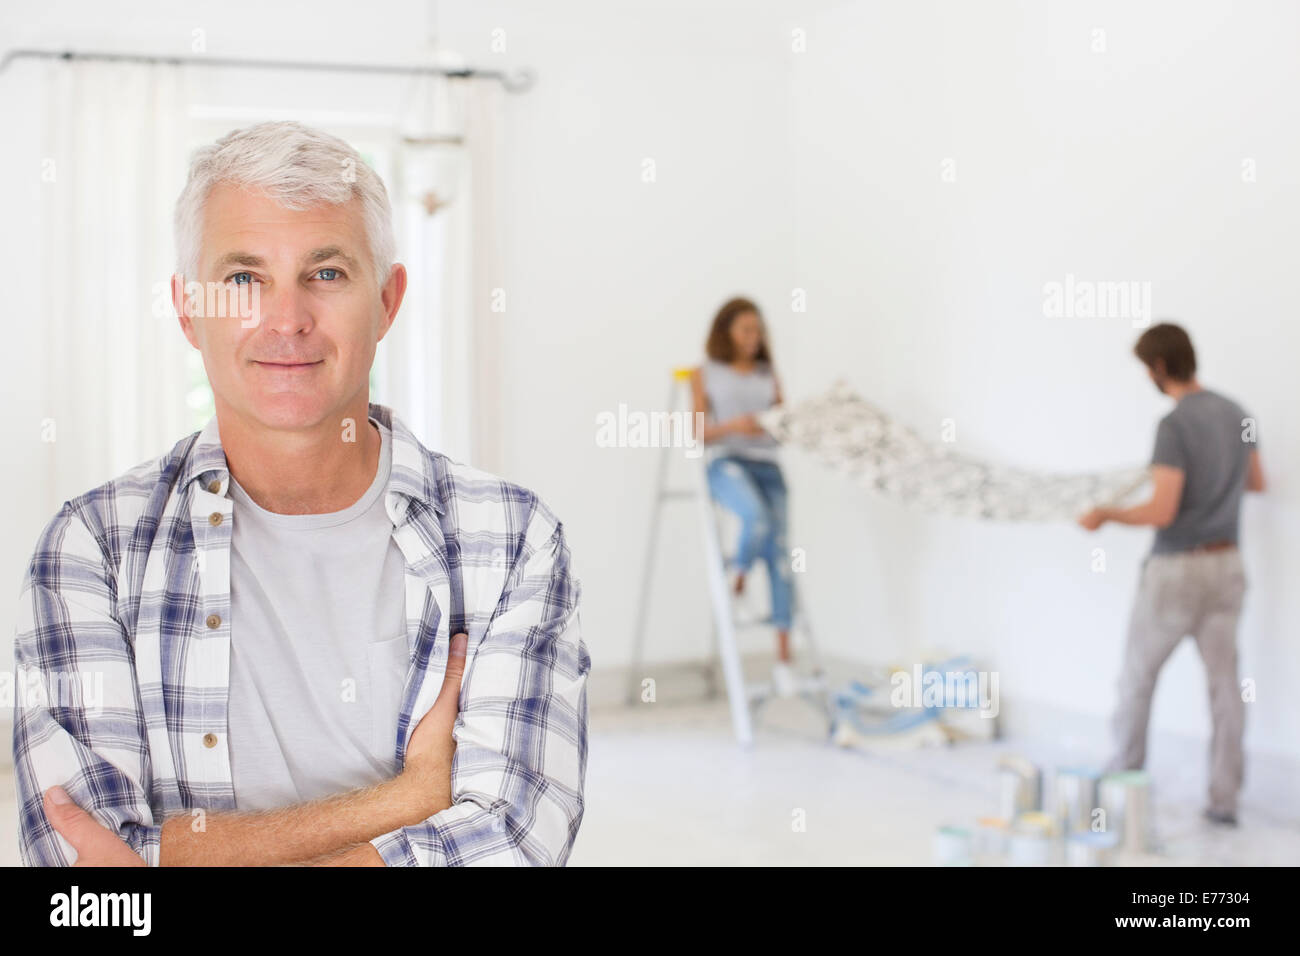 Older man smiling with family working Stock Photo